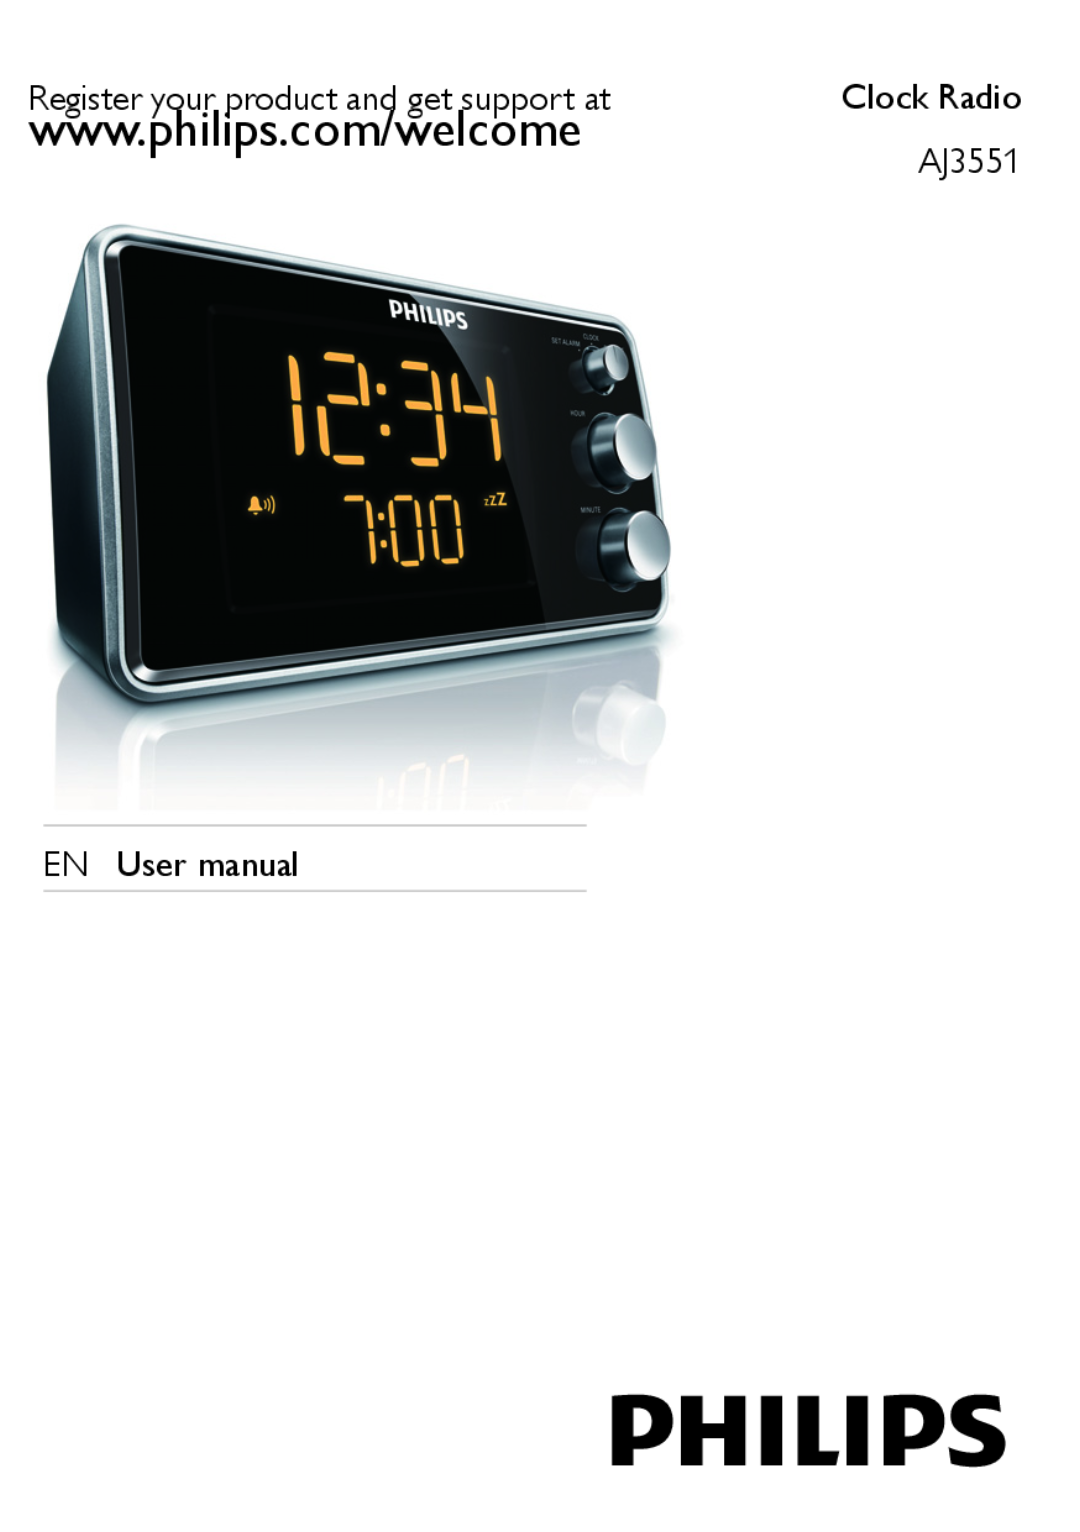 Philips AJ3551 user manual Register your product and get support at, EN User manual, Clock Radio 